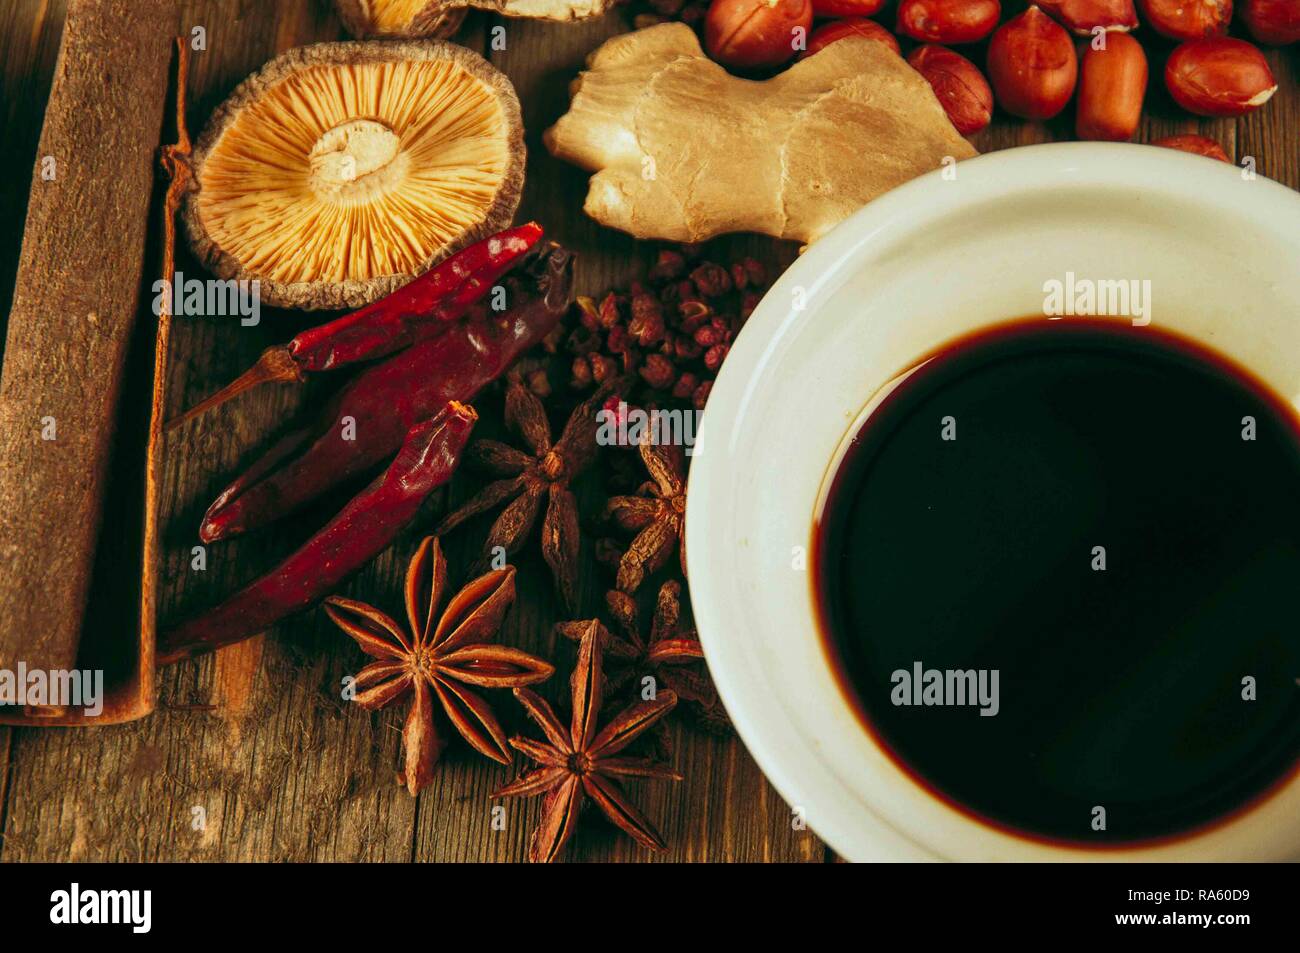 Lay flat of Chinese cooking spices including ginger, star anise, soy sauce, cinnamon bark, dry chili peppers, peanuts and others on wooden background Stock Photo